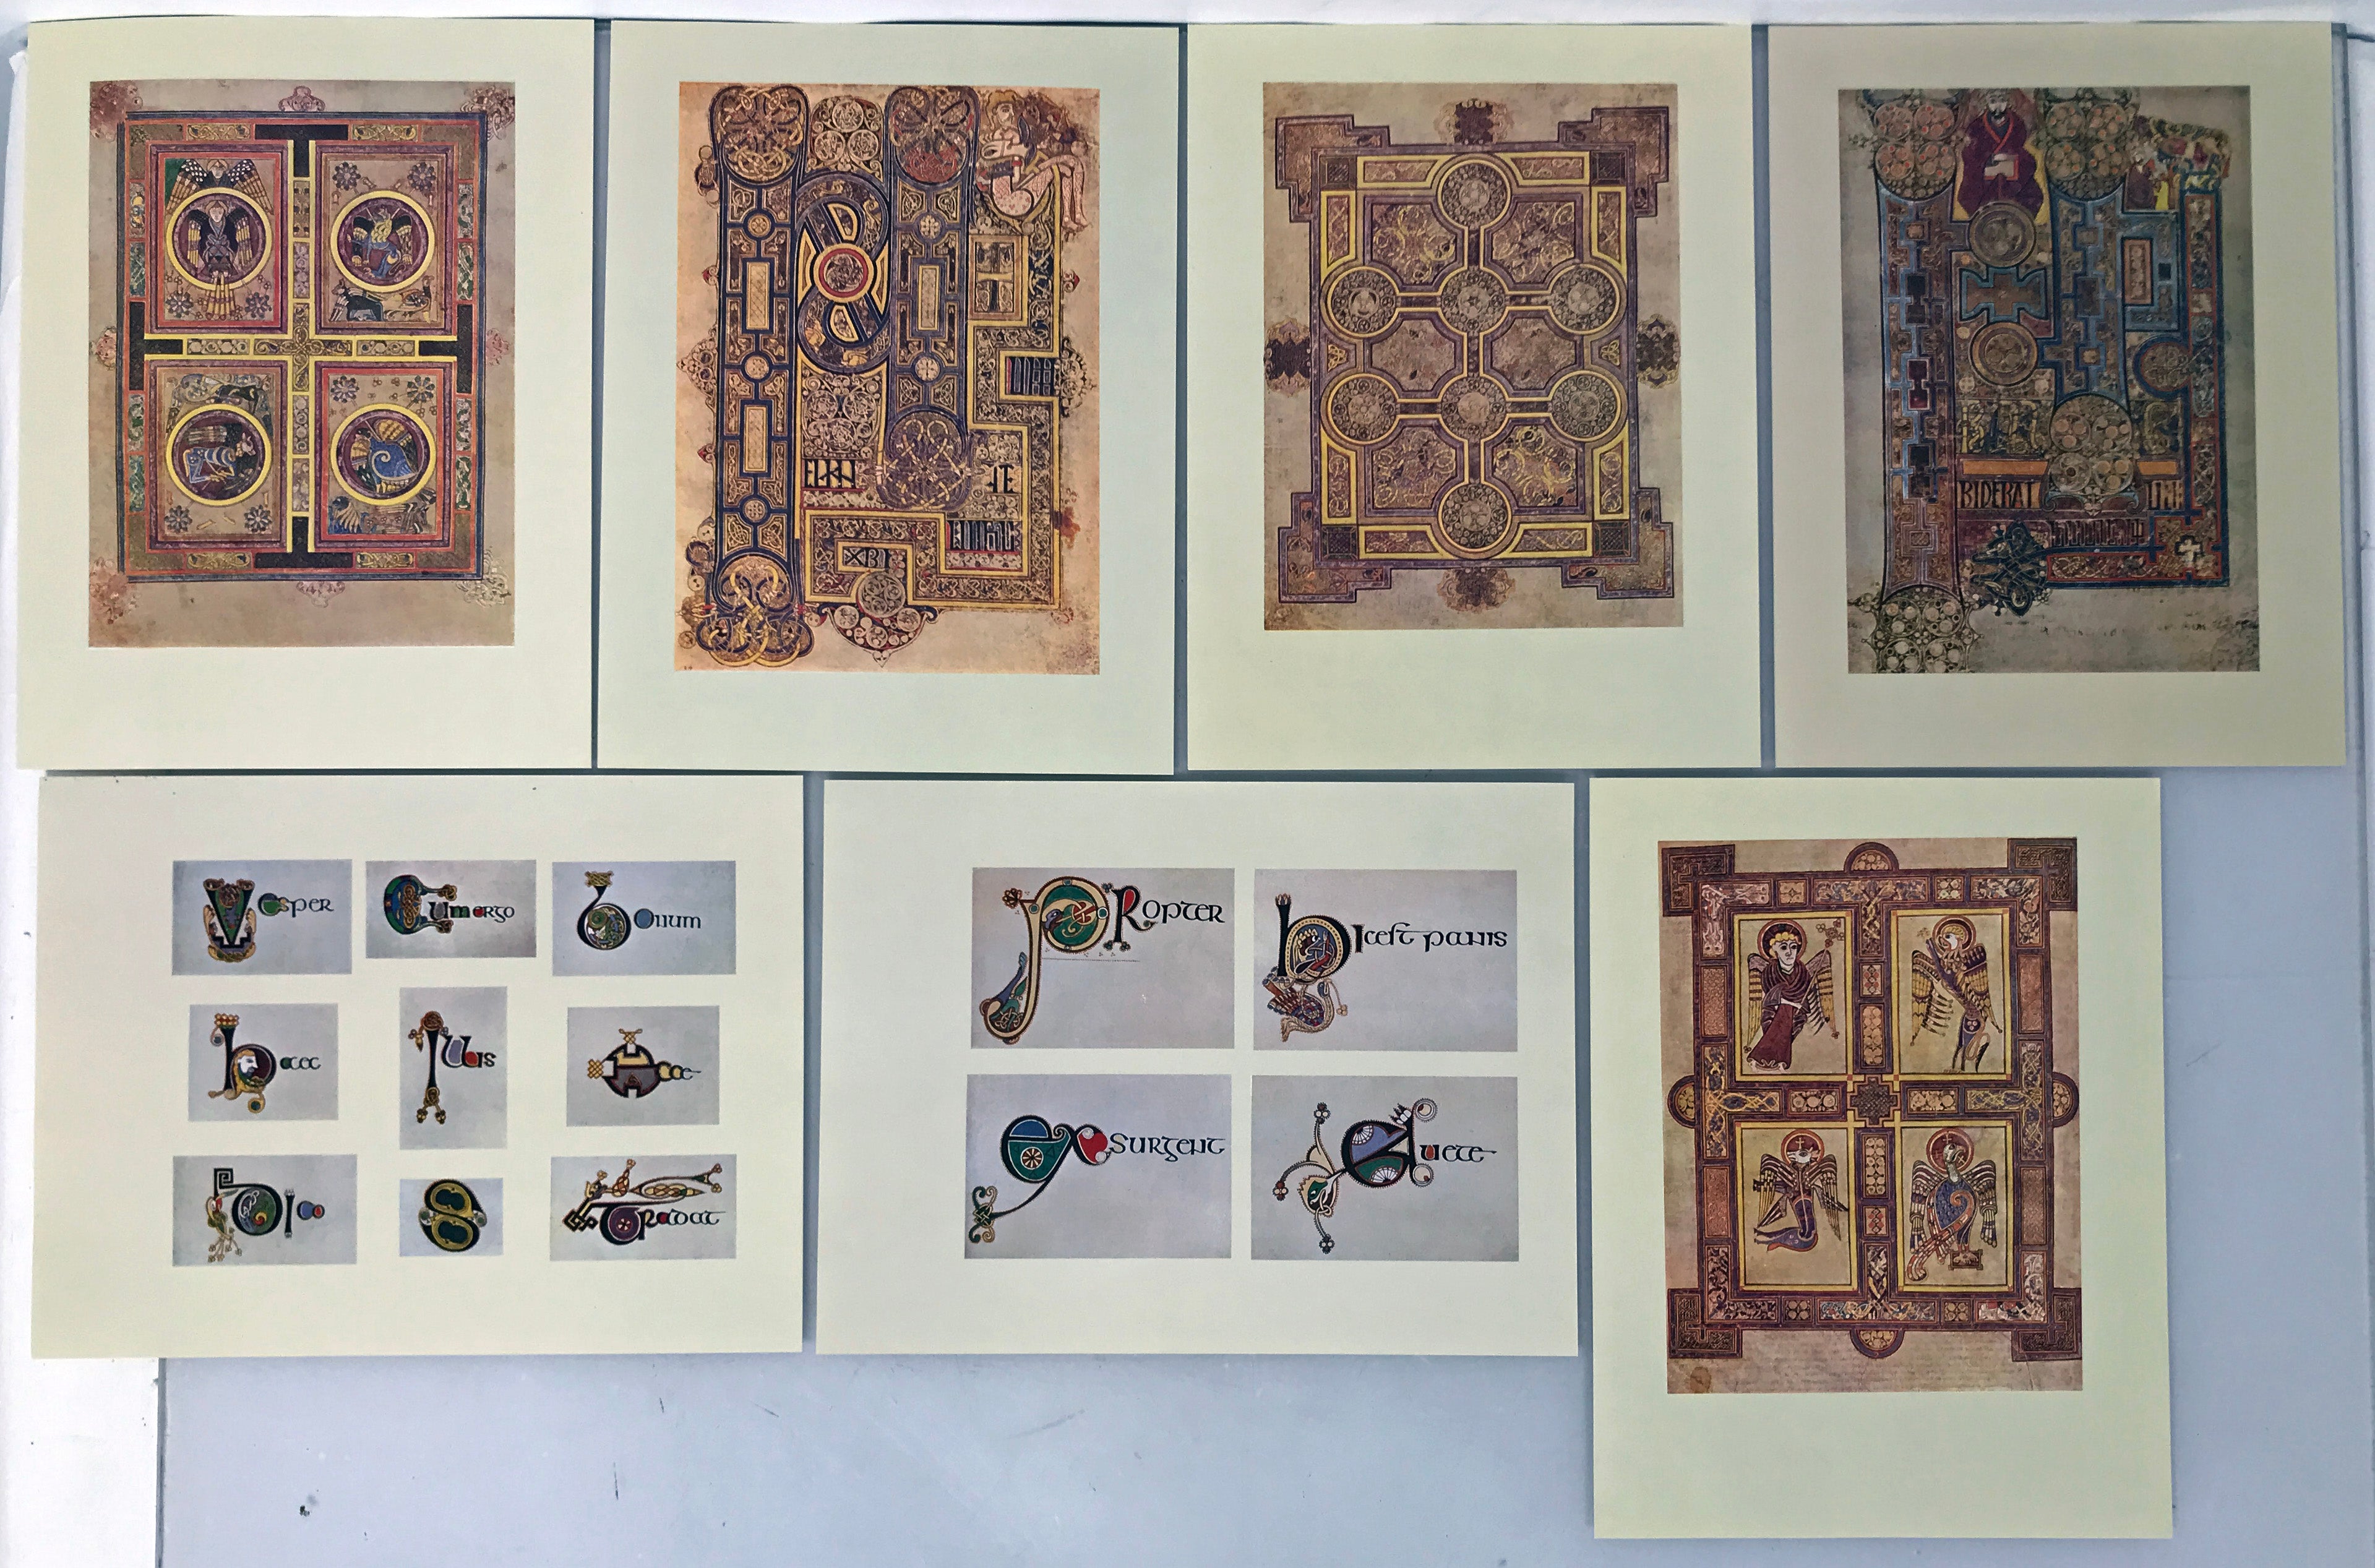 Set of Prints from The Book of Kells